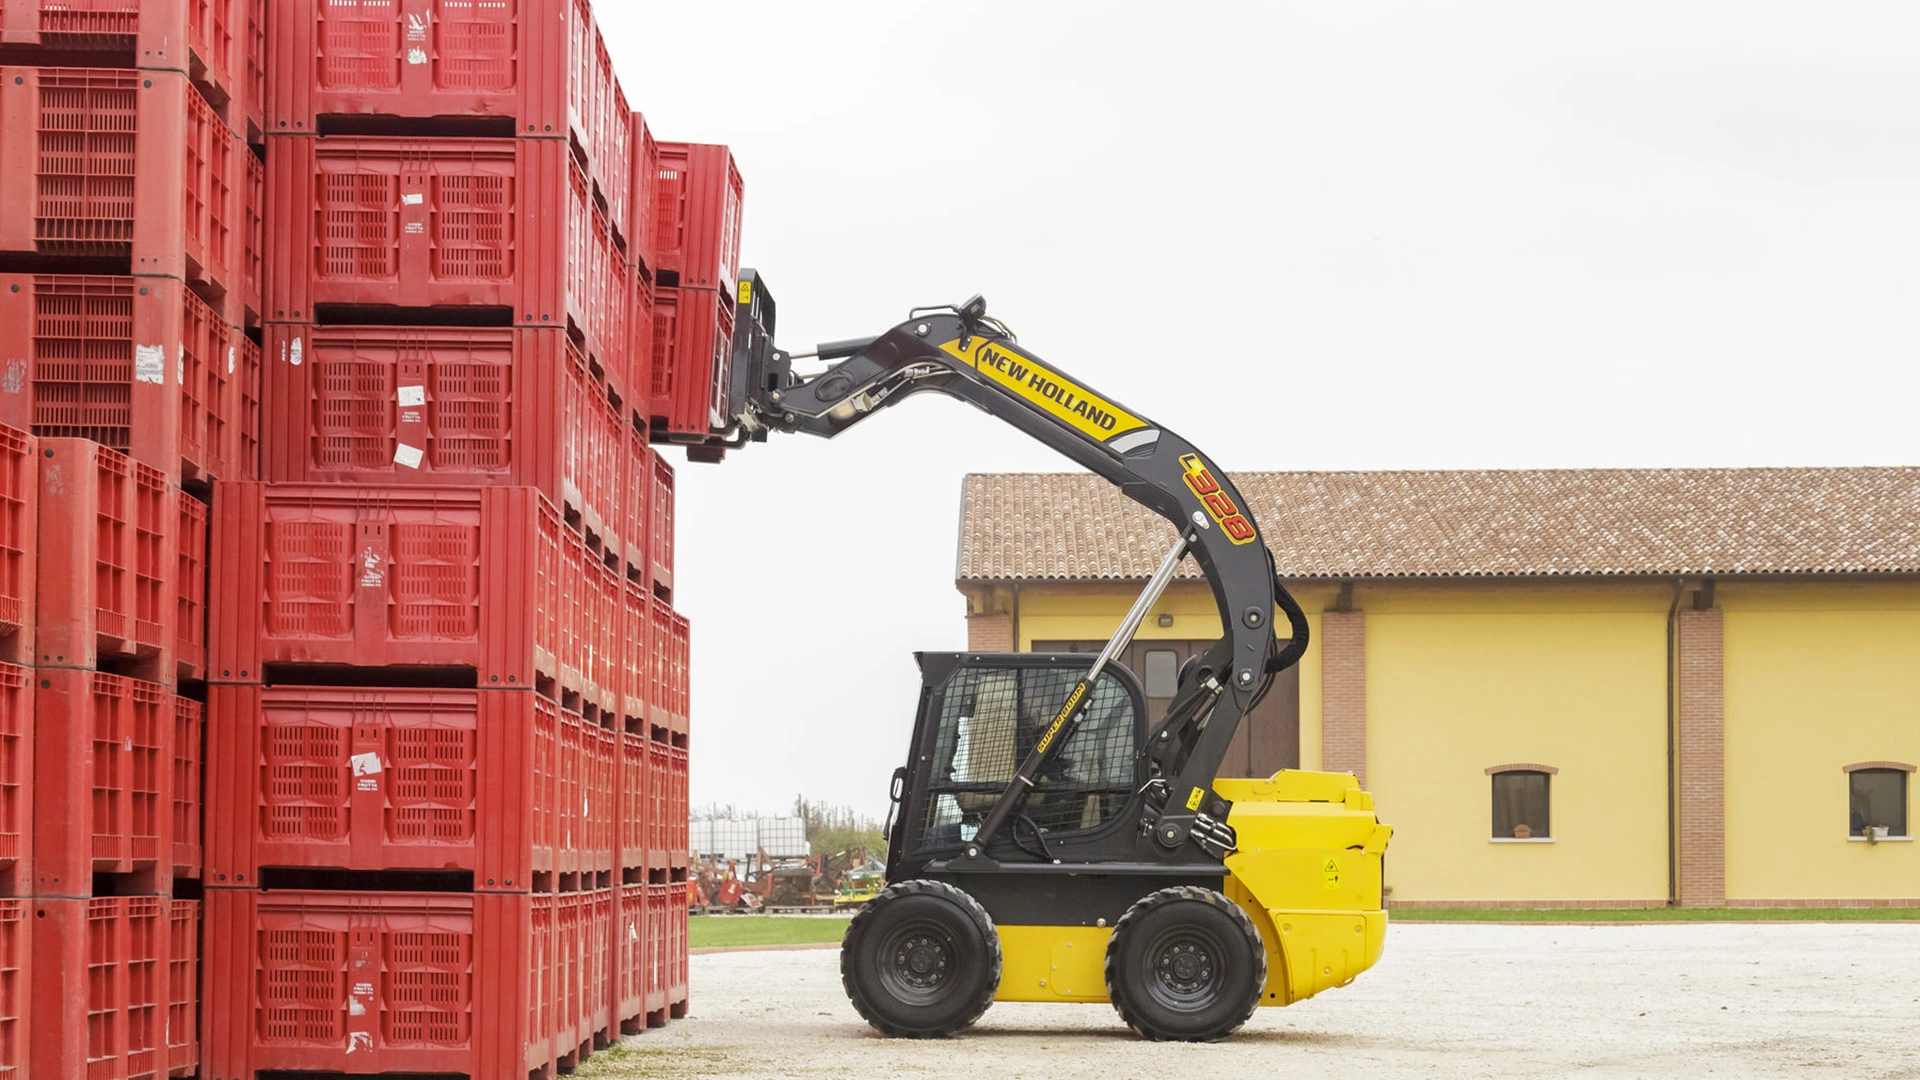 New Holland Skid Steer Loader stacking red crates outside a warehouse with clay-tiled roof.